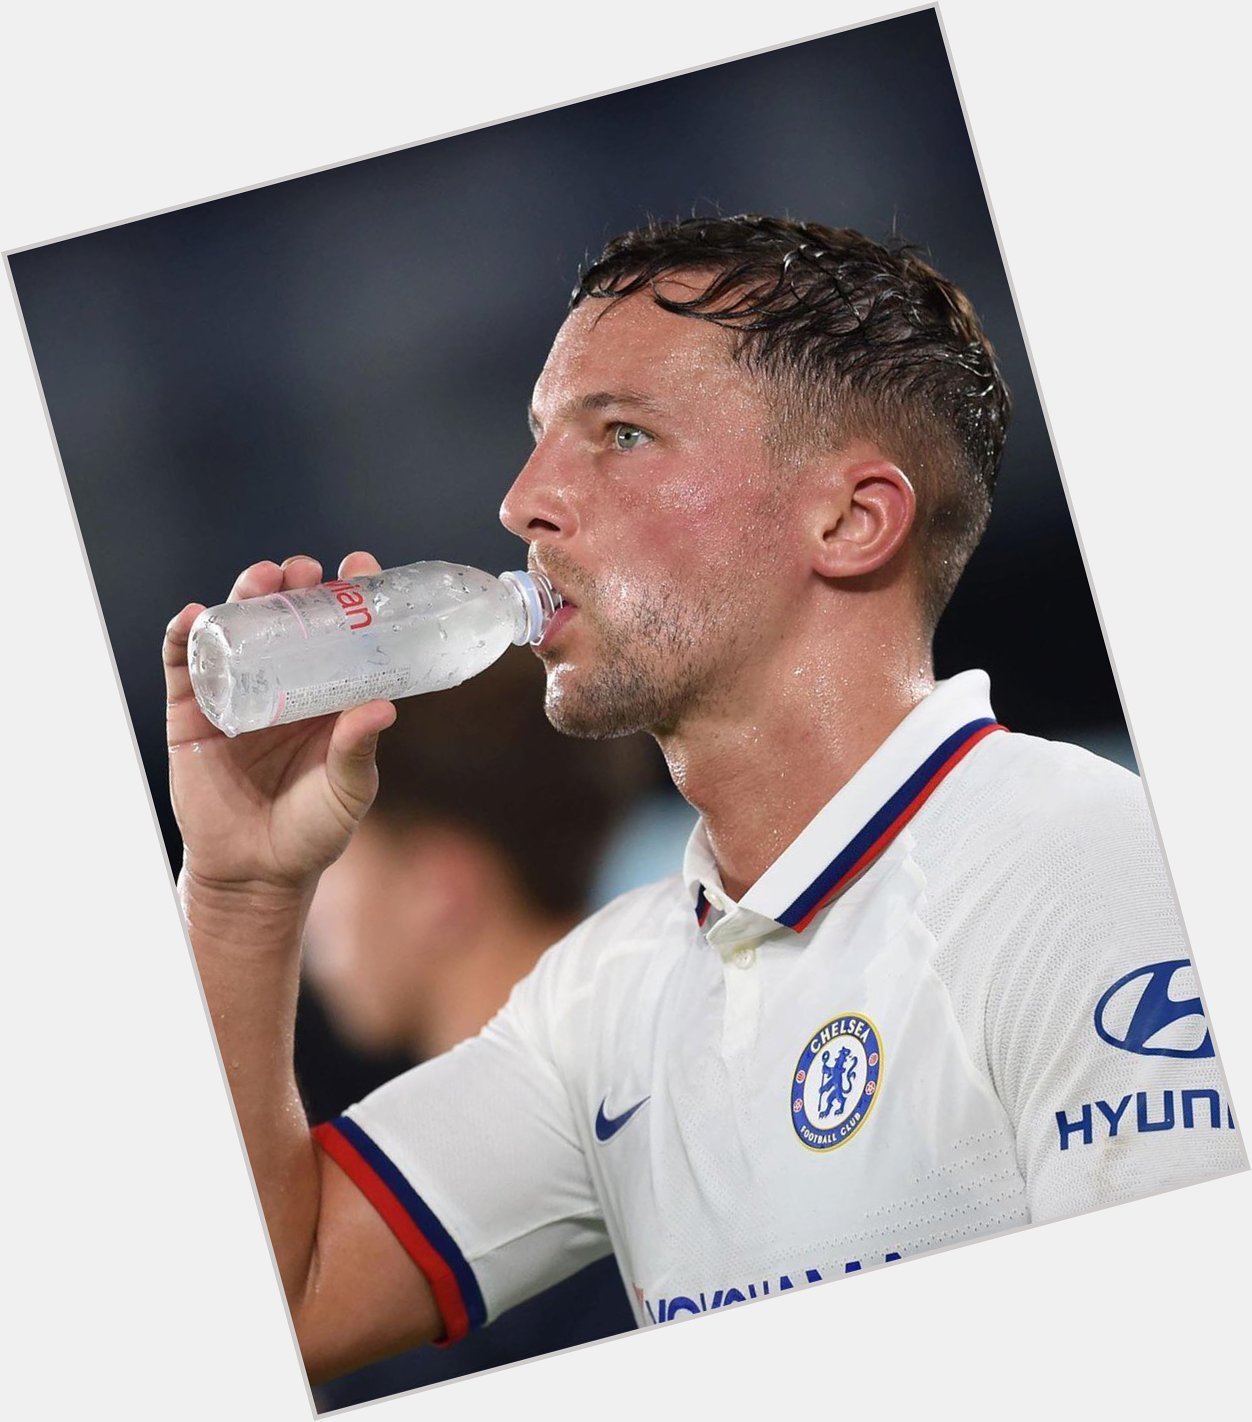  Happy birthday to Danny Drinkwater, who turns 33 today. 

Here he is, drinking water. That is all. 